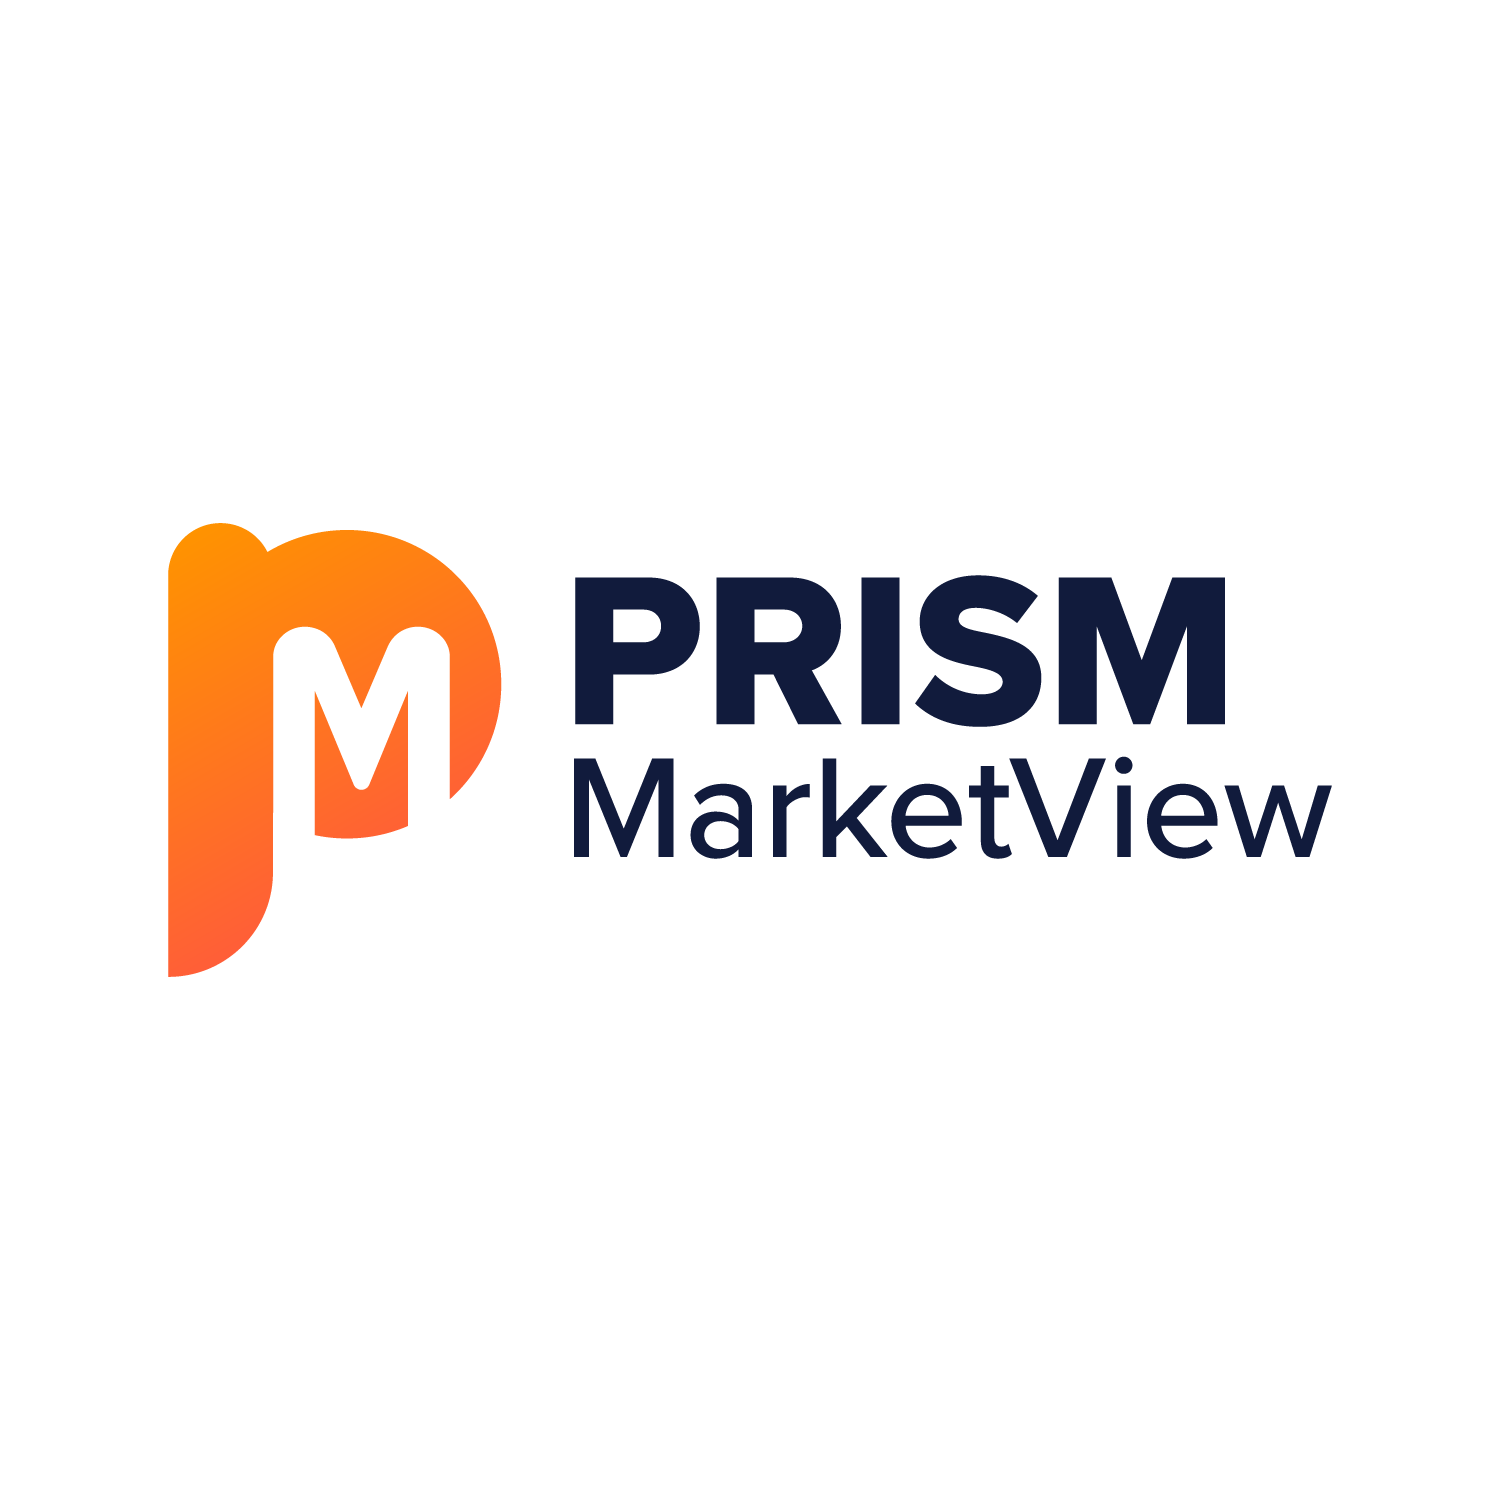 PRISM MarketView’s Emerging Healthcare Index Highlights LifeMD, Inc. as its Largest YTD Gainer, Up ~226%